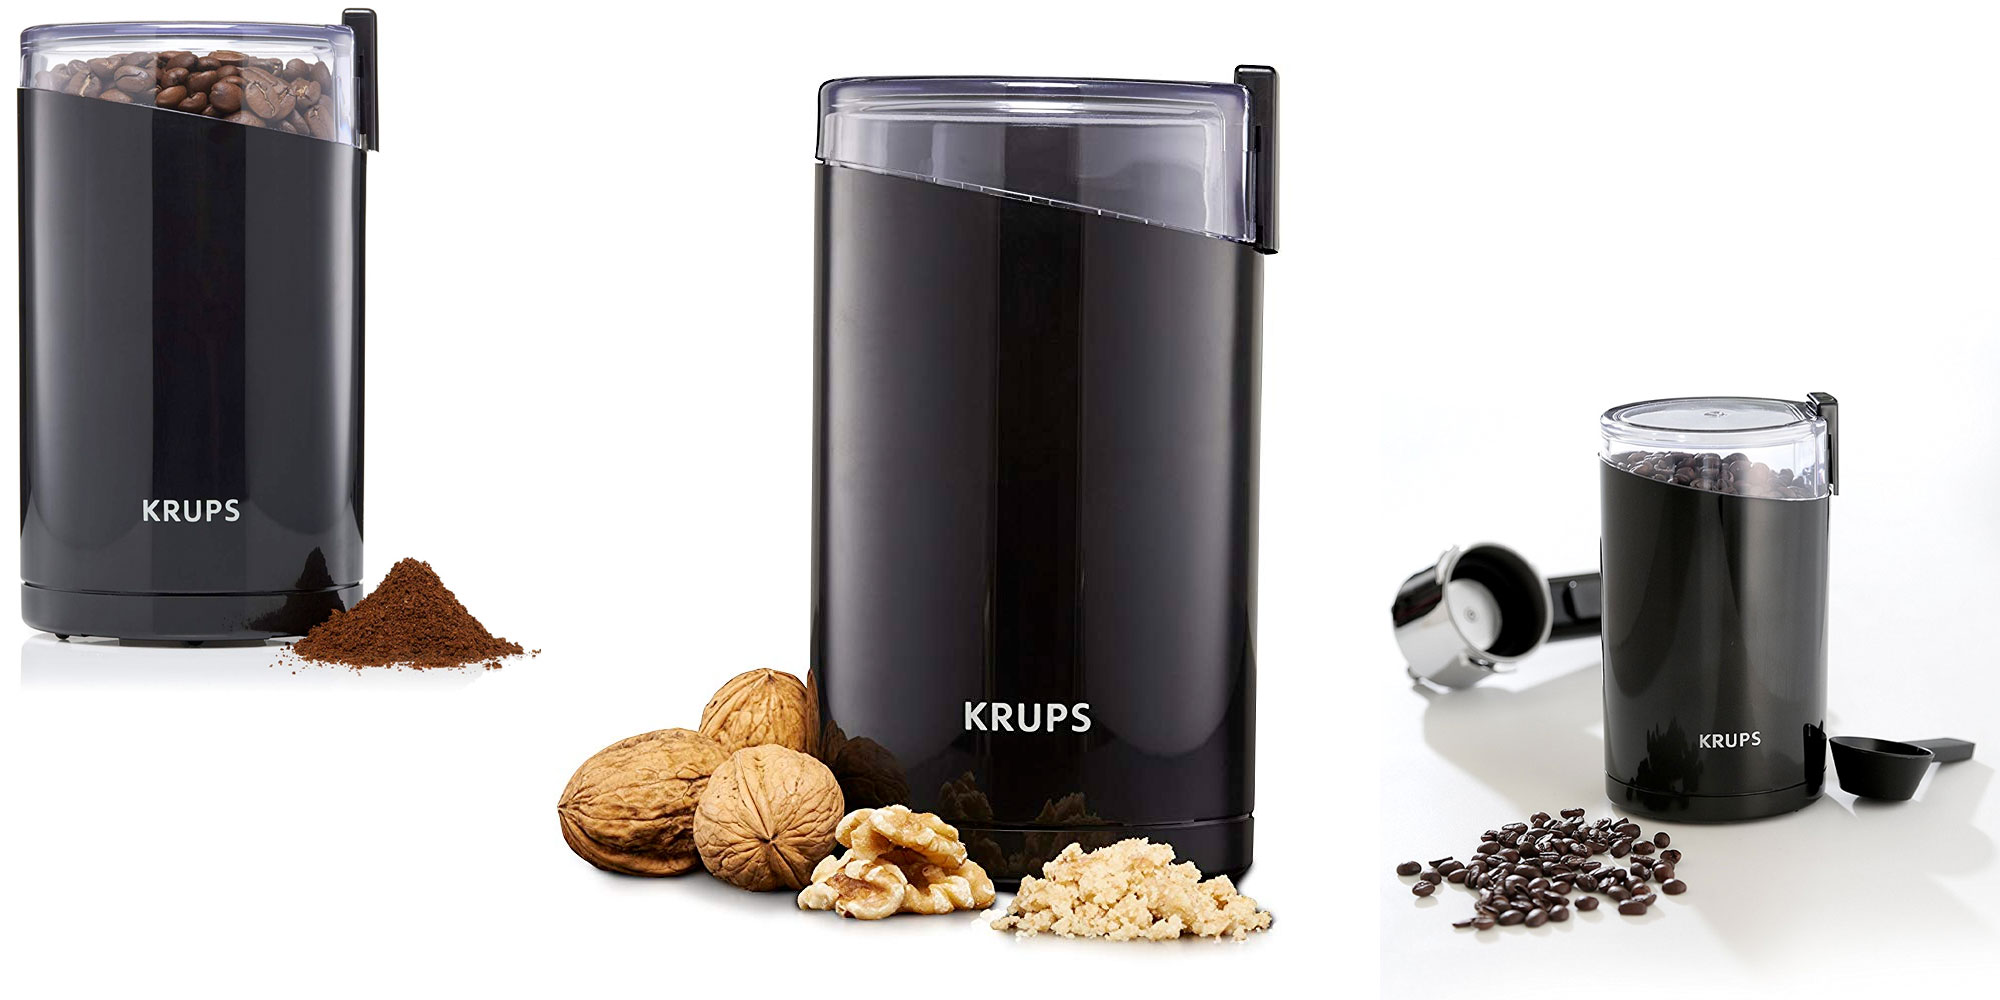 Save 20 on Amazon's bestselling coffee grinder from